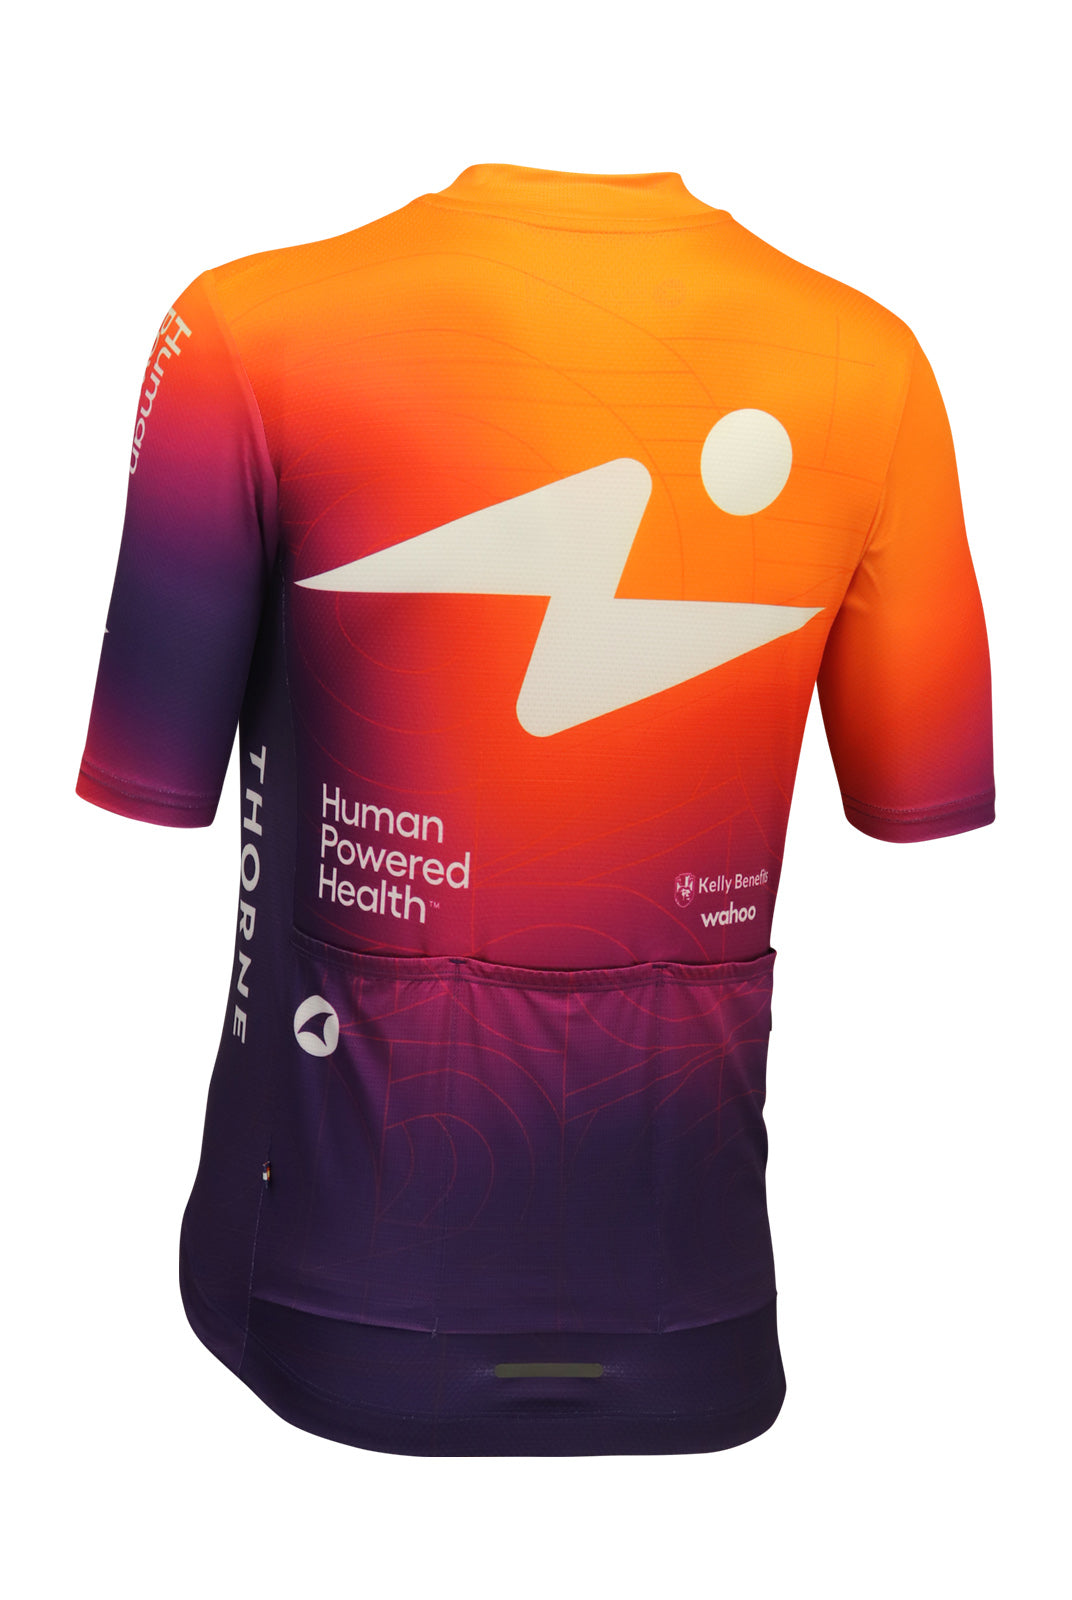 Human Powered Health Women's Ascent Cycling Jersey - Back View